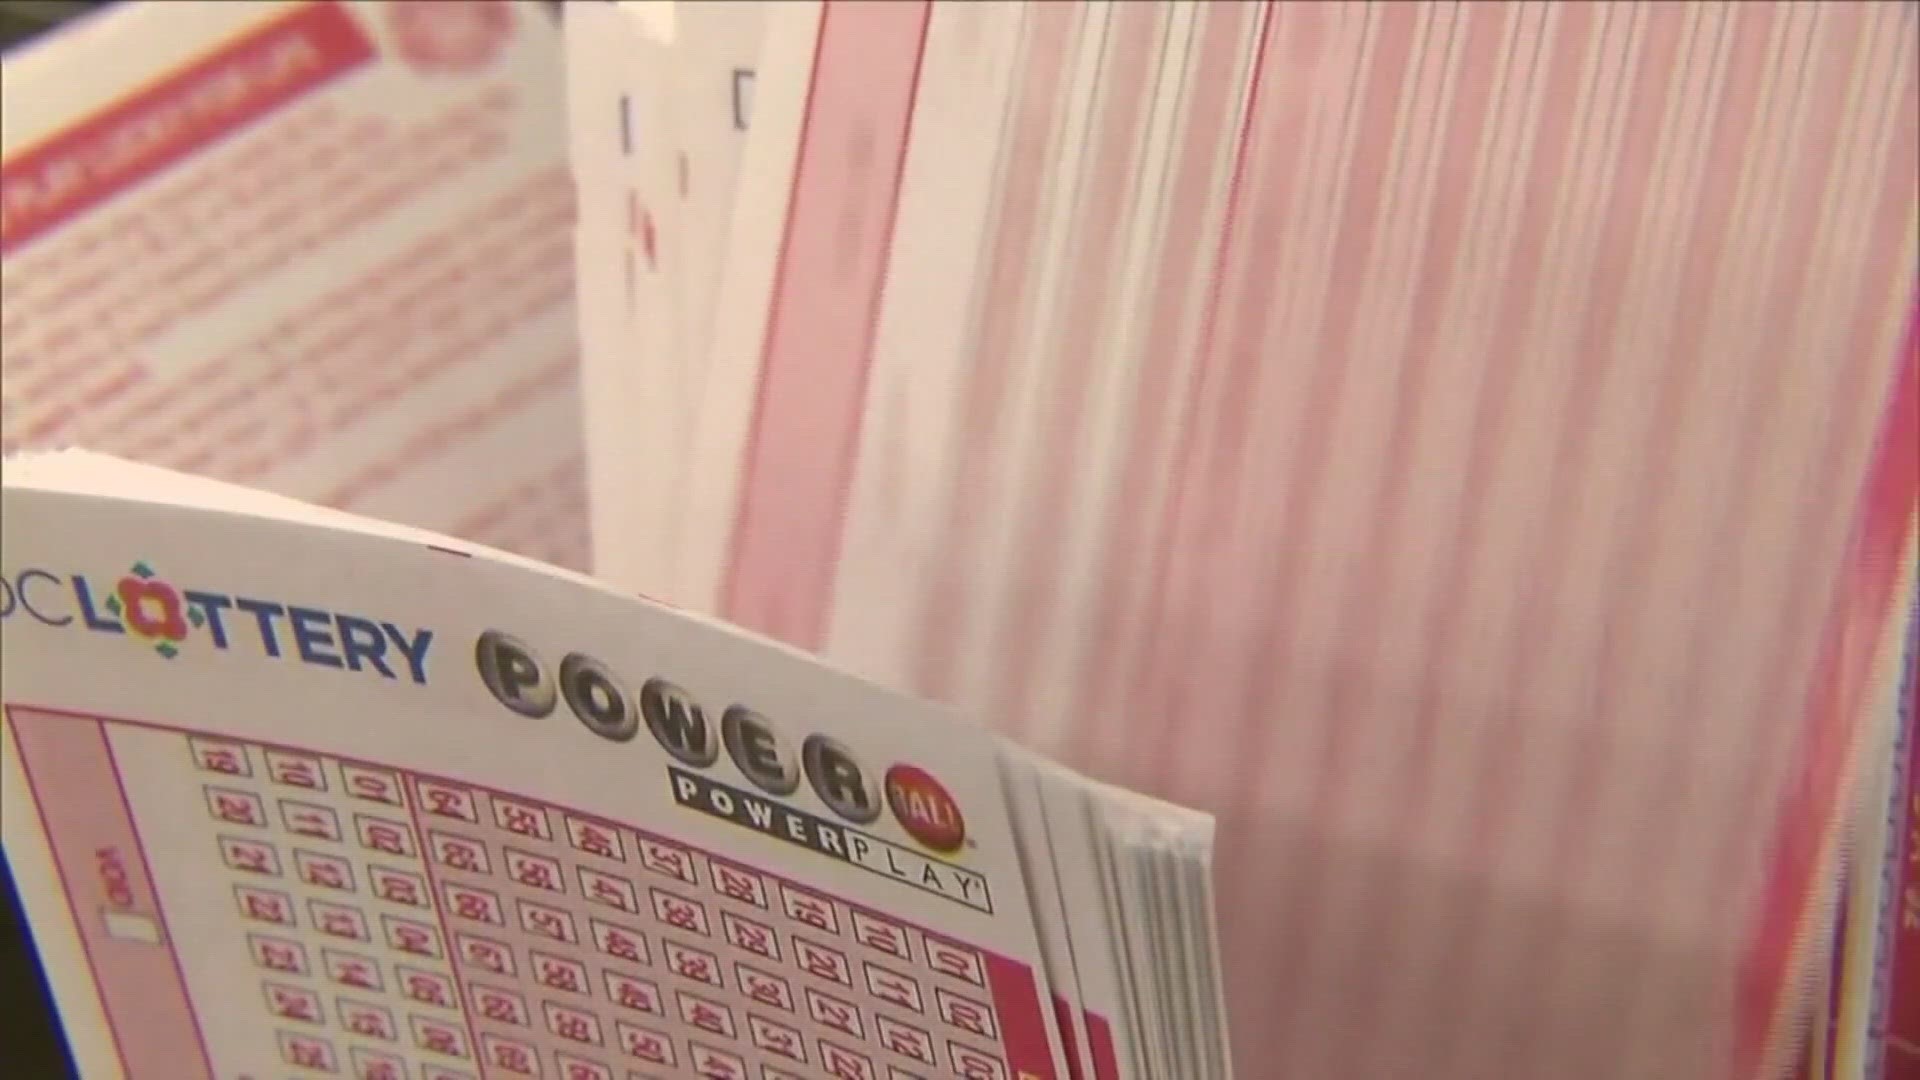 No one has won a Powerball jackpot since New Year's Day.